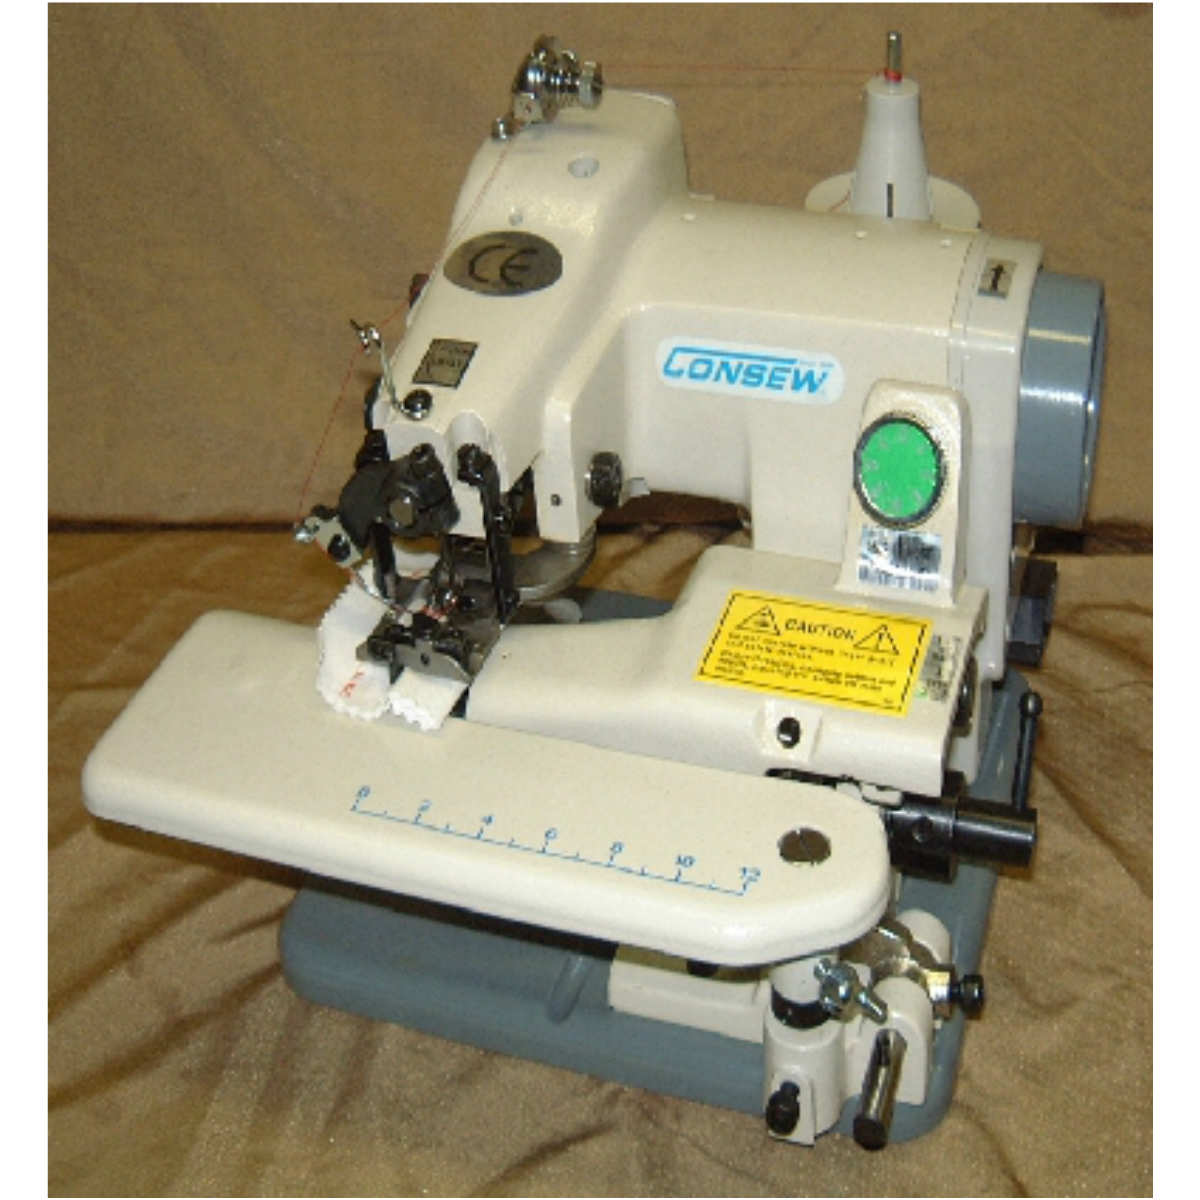 75T “Portable Blind stitch“ - Stanley Sewing Machines